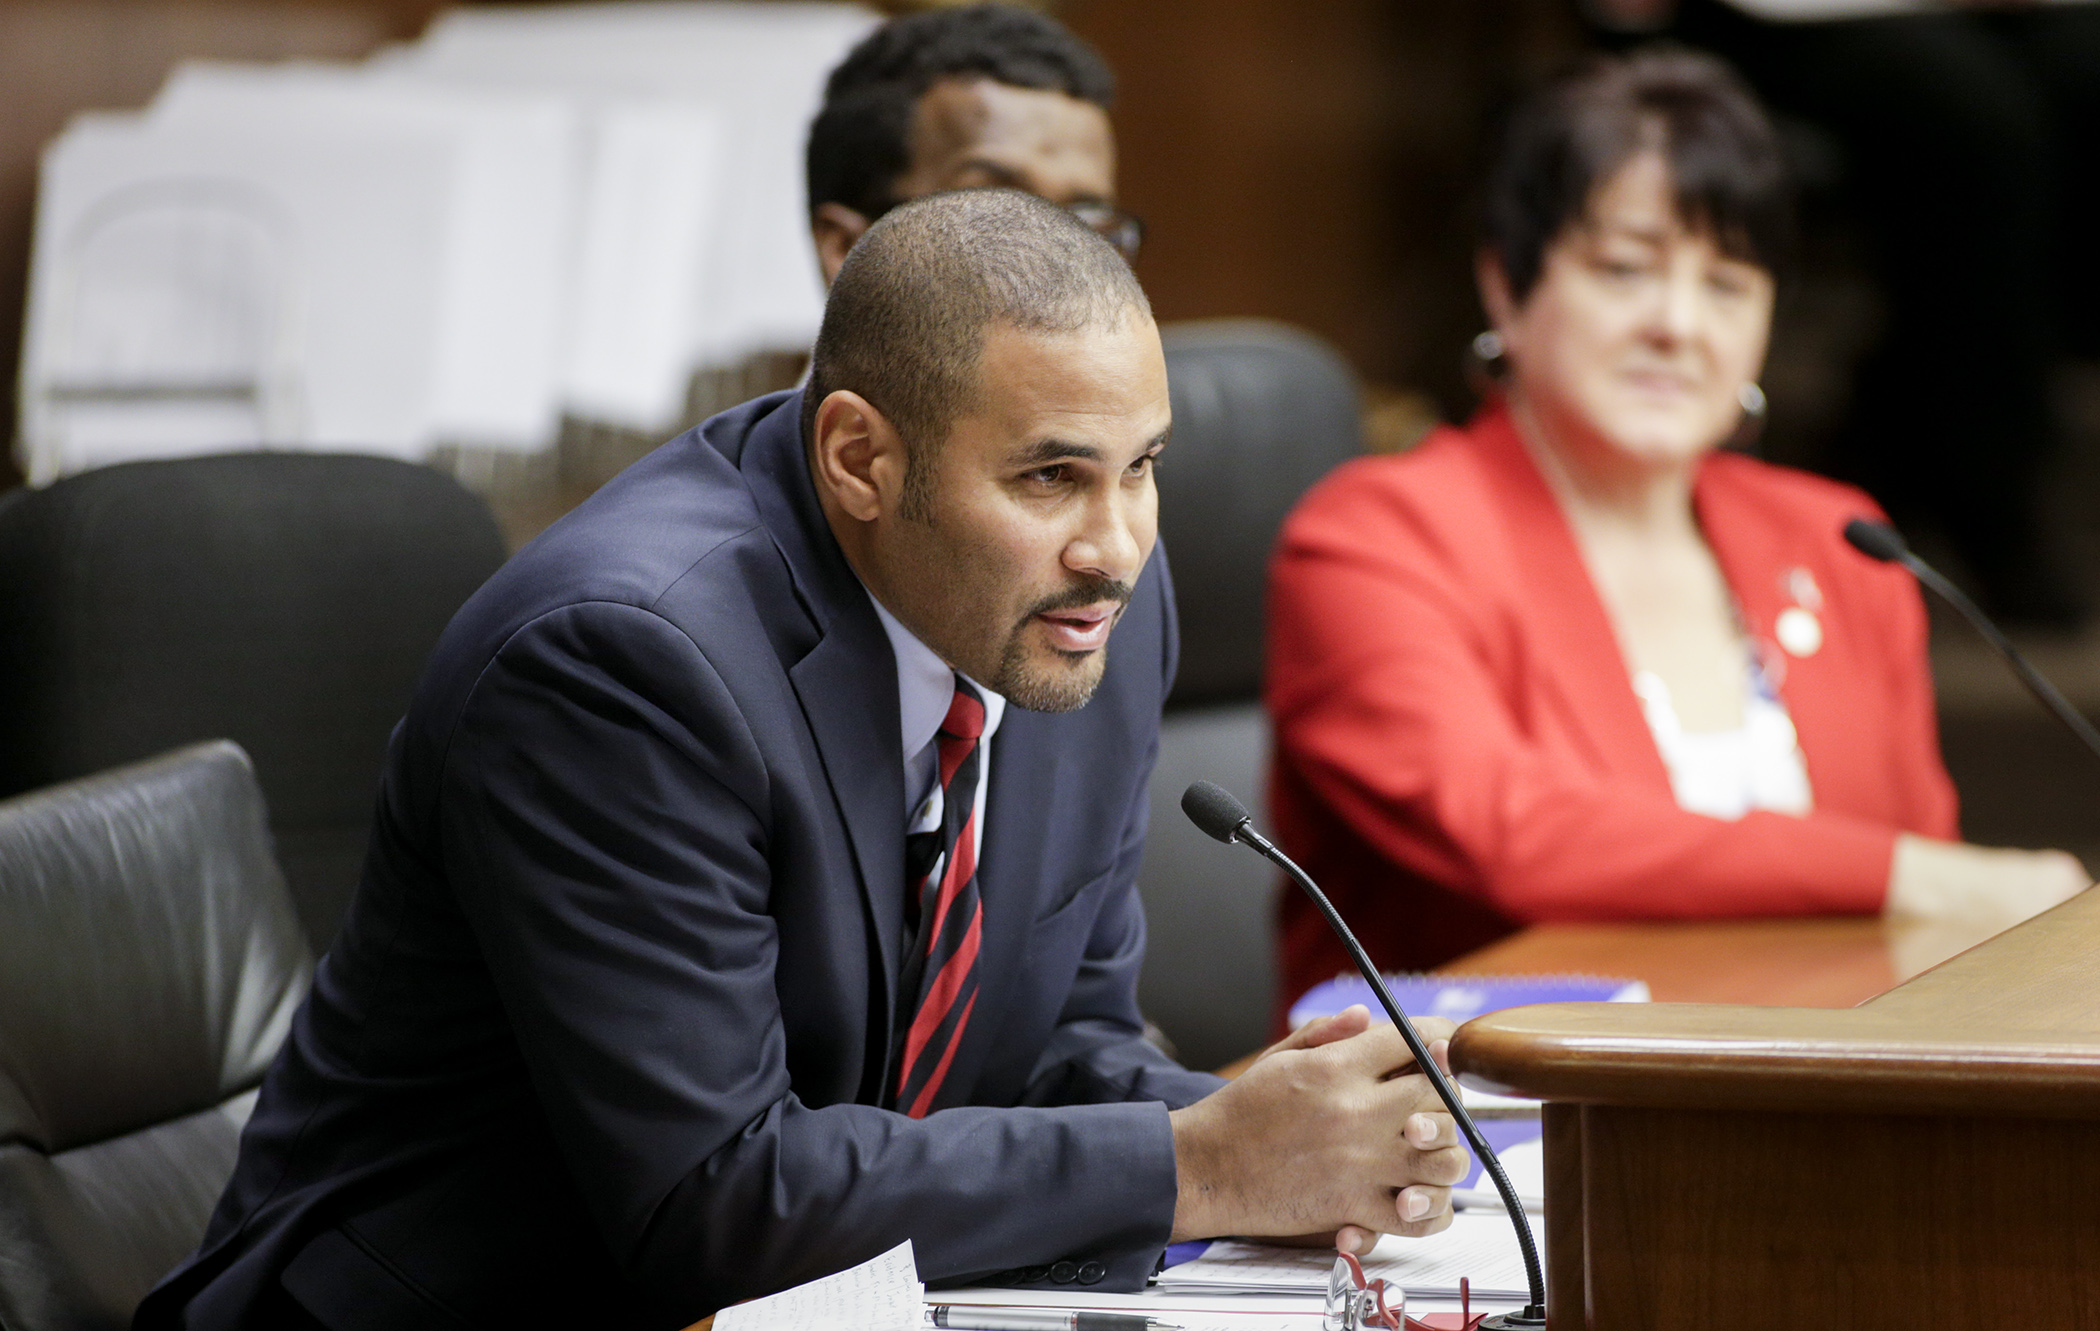 Tony Sanneh, CEO of the Sanneh Foundation, testifies March 7, in favor of HF268, sponsored by Rep. Tama Theis, which would authorize grants to the foundation to provide all-day, in-school, and after-school academic and behavioral interventions for low-performing and chronically absent students. Photo by Paul Battaglia